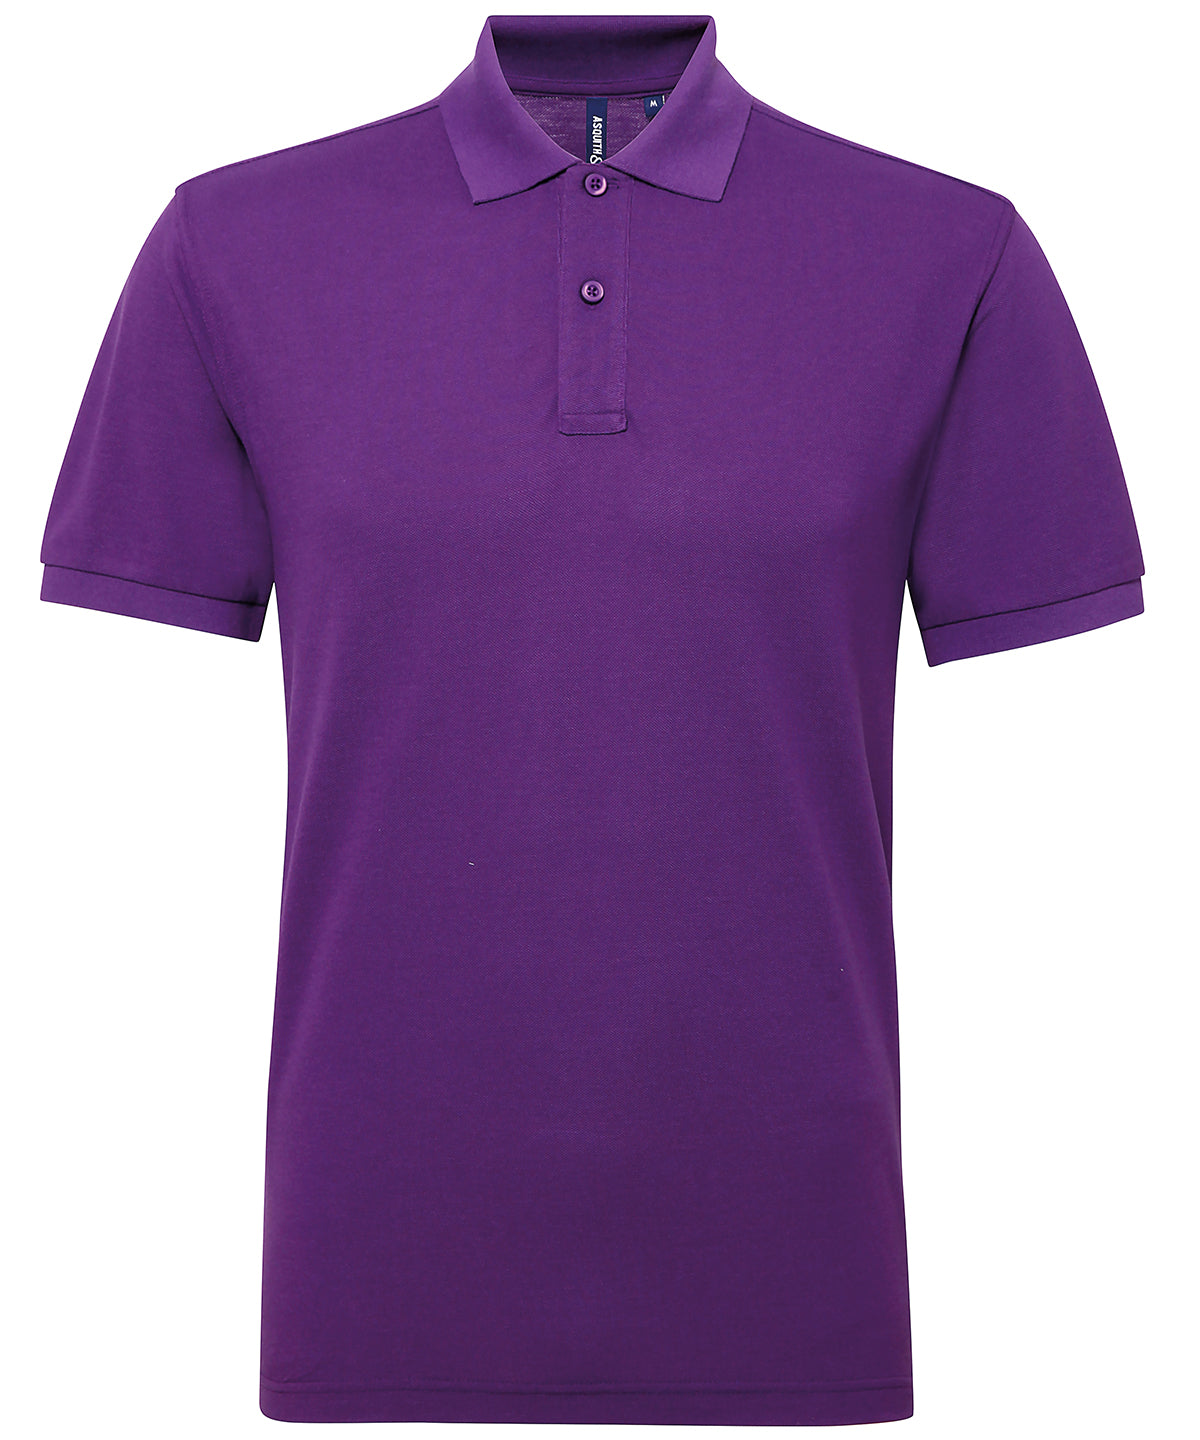 Personalised Polo Shirts - Bottle Asquith & Fox Men’s polycotton blend polo